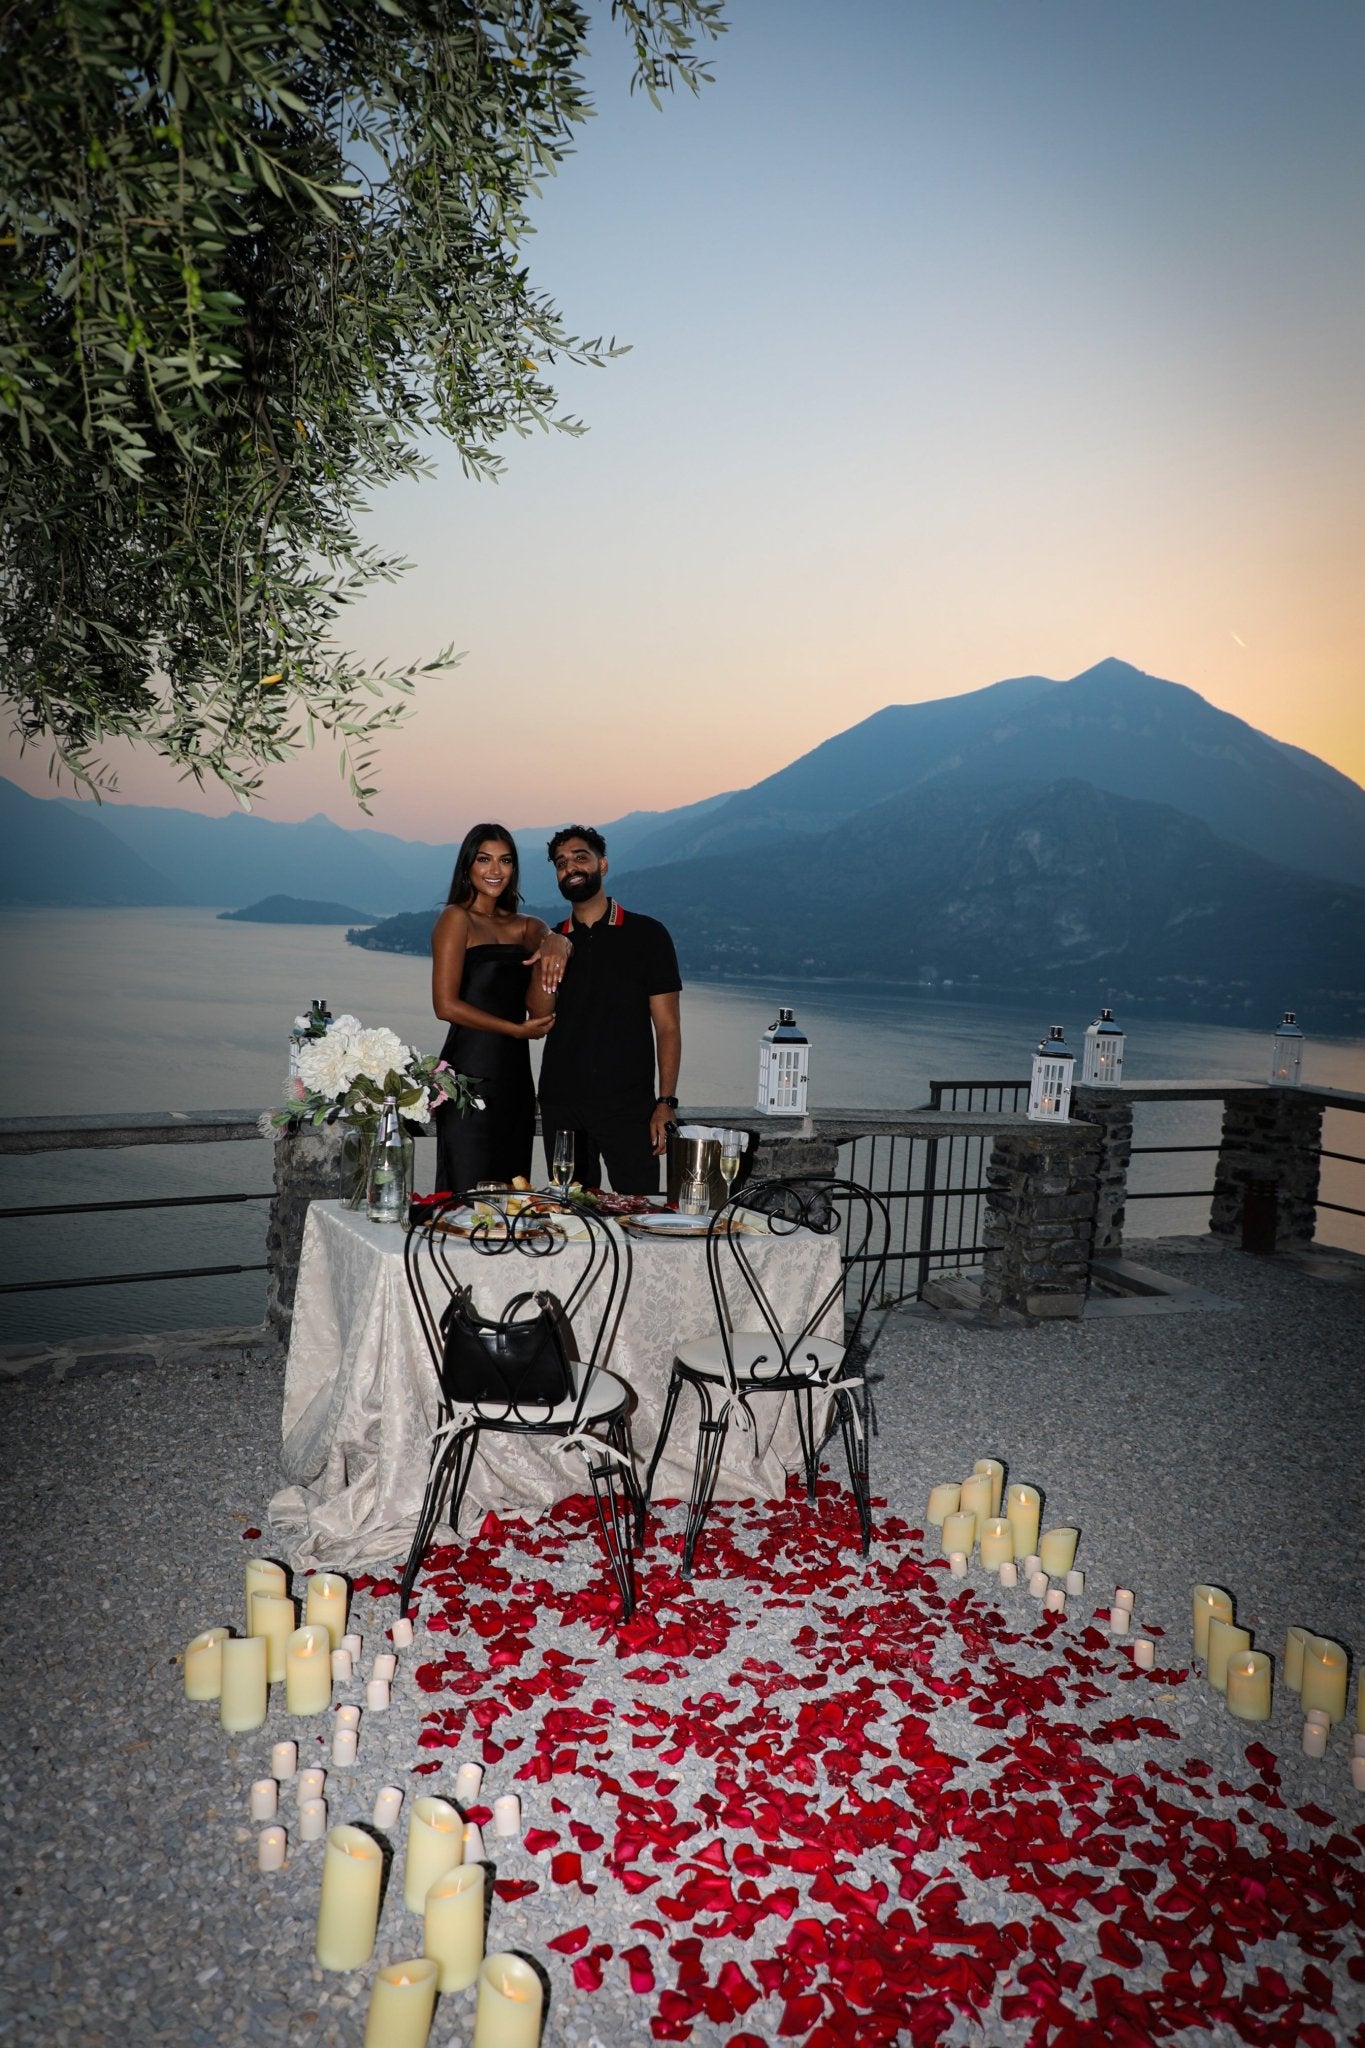 Proposal Photo Shoot at Castello di Vezio with Flowers, Food and Music - FRAQAIR